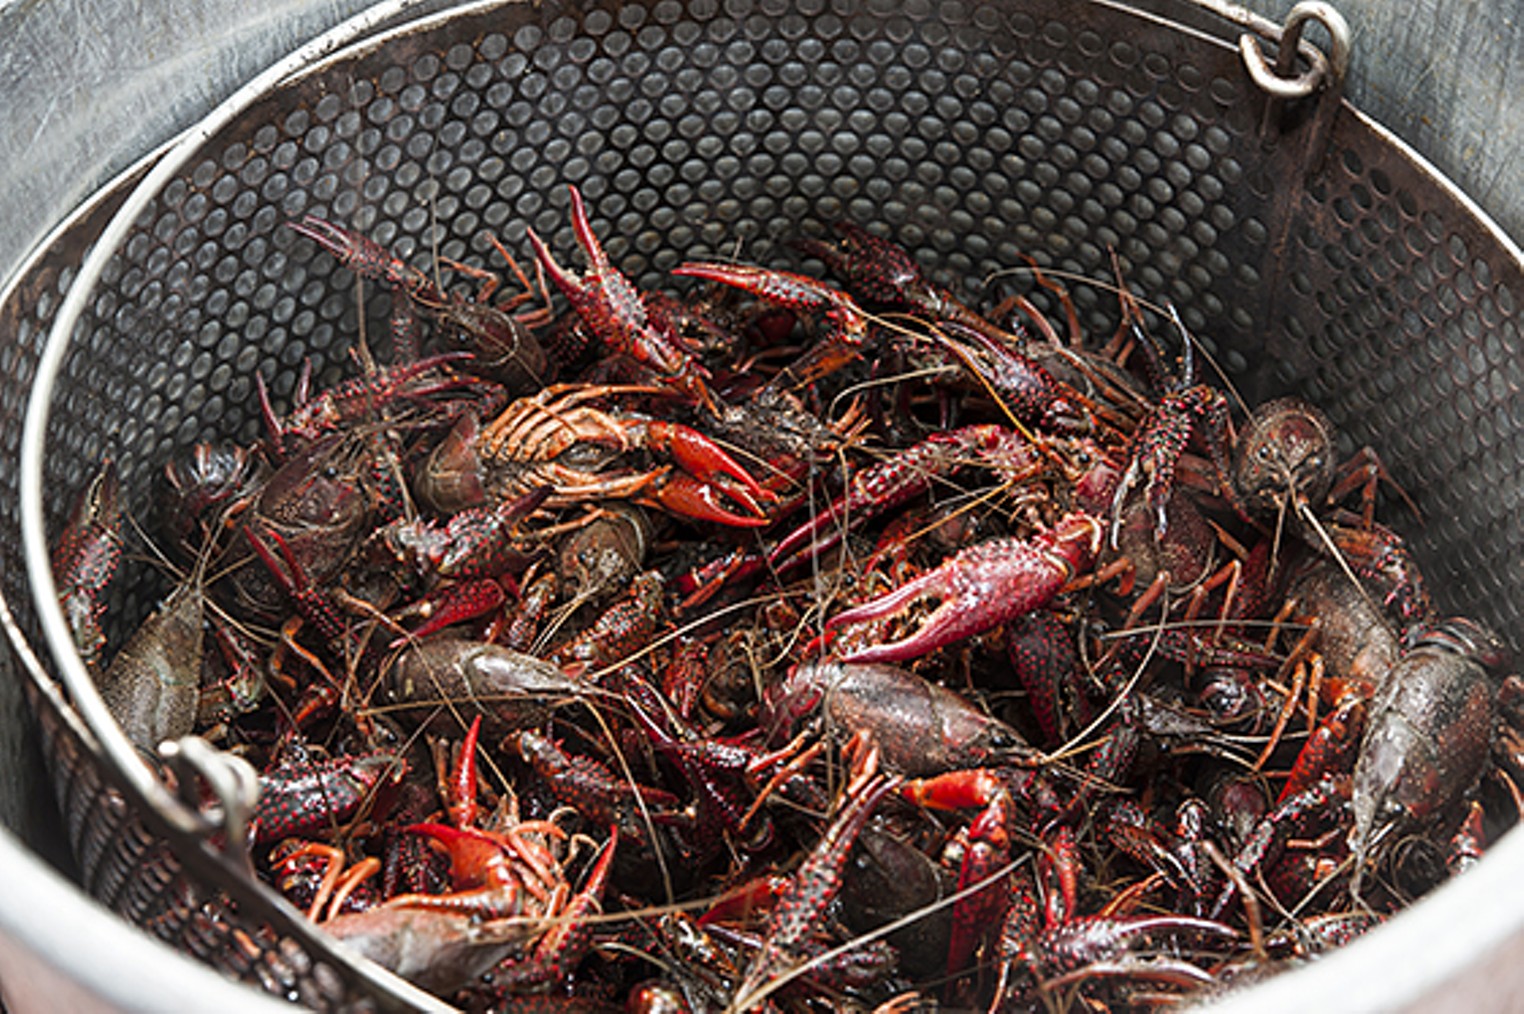 Astros Crawfish Boil: March 18th, 2022 - The Crawfish Boxes